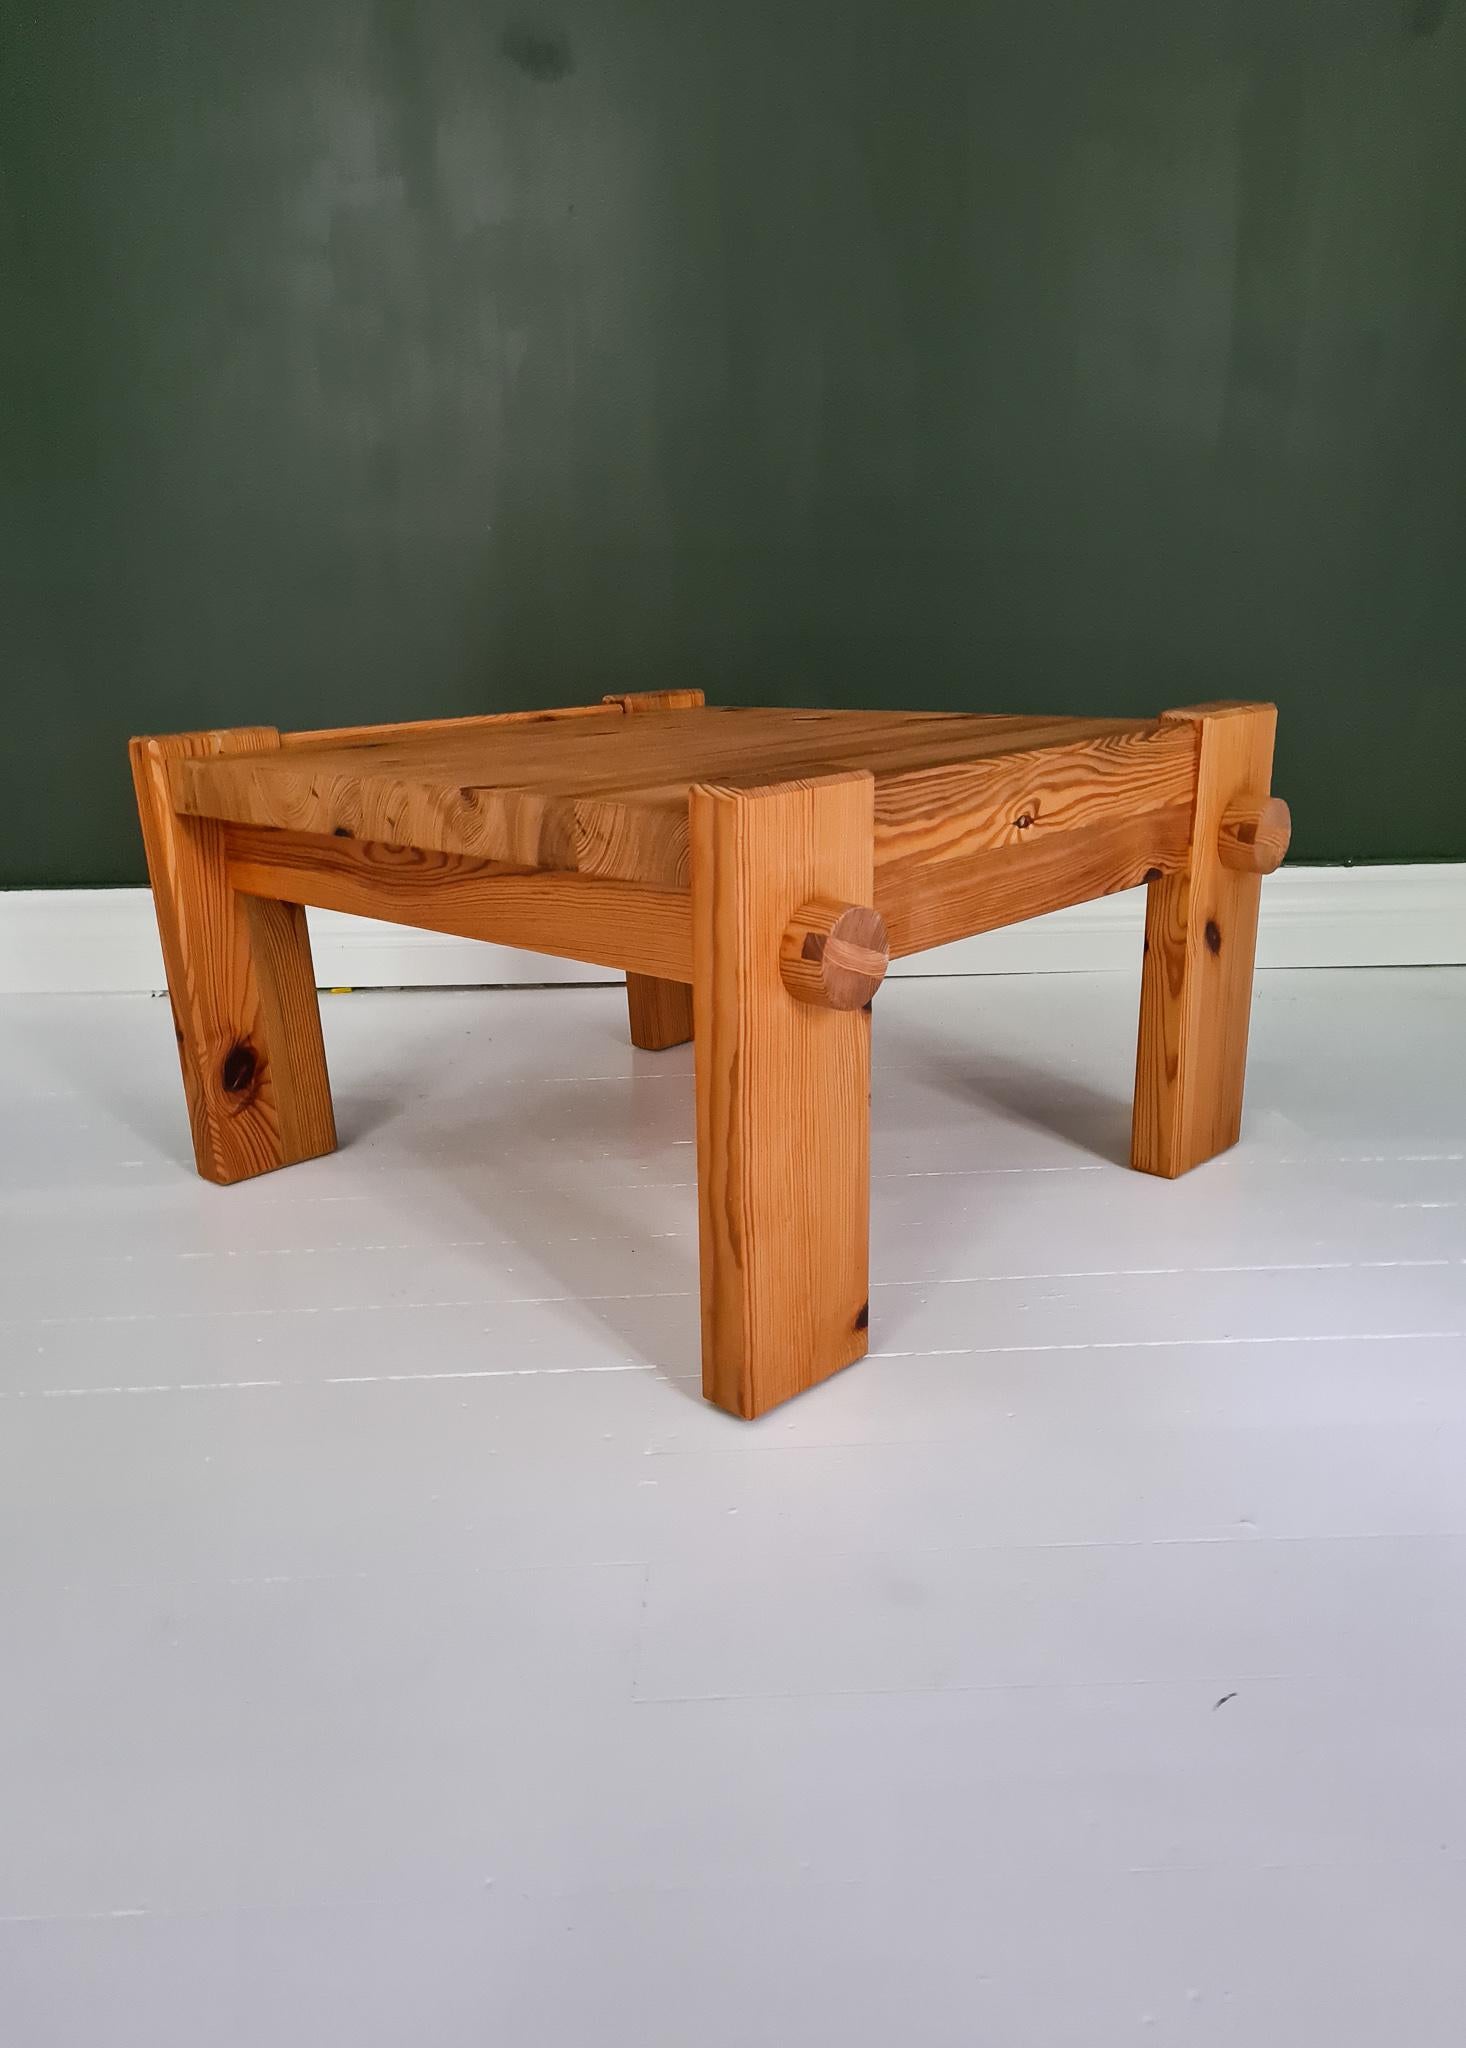 Wonderful coffee table in solid pine designed by Yngve Ekström for Swedese, circa 1970.
This table makes a great example of a Classic robust pine furniture made in Sweden. It’s made in solid and thick pine with many nice details. 

Condition: